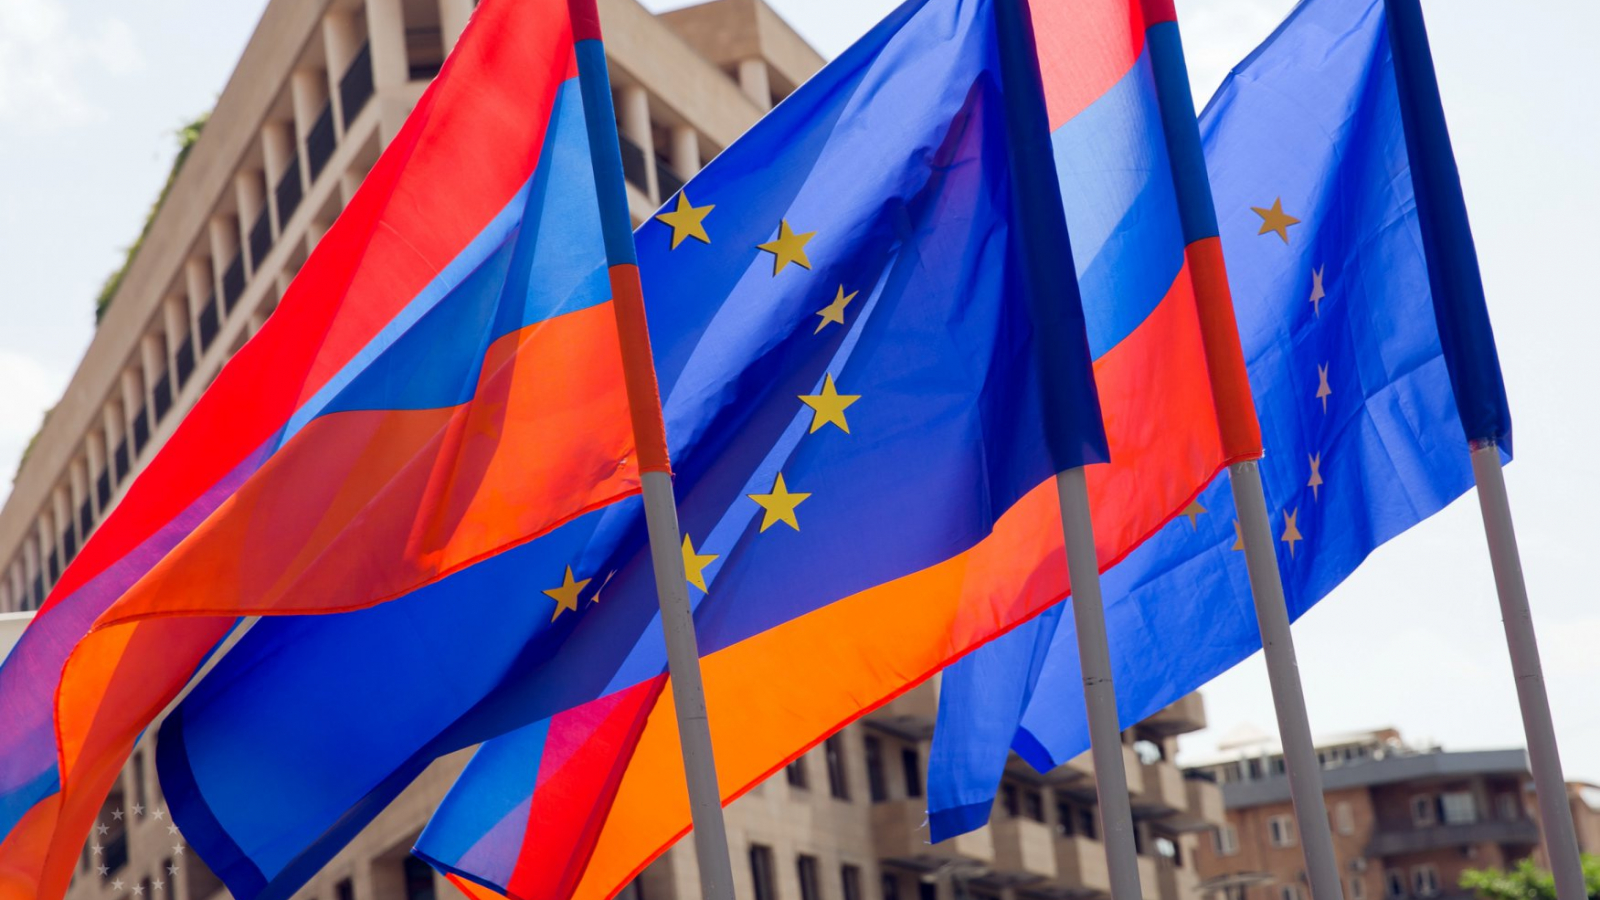 EU: We look forward to an independent, efficient and accountable judiciary being put in place in Armenia for the benefit of its citizens